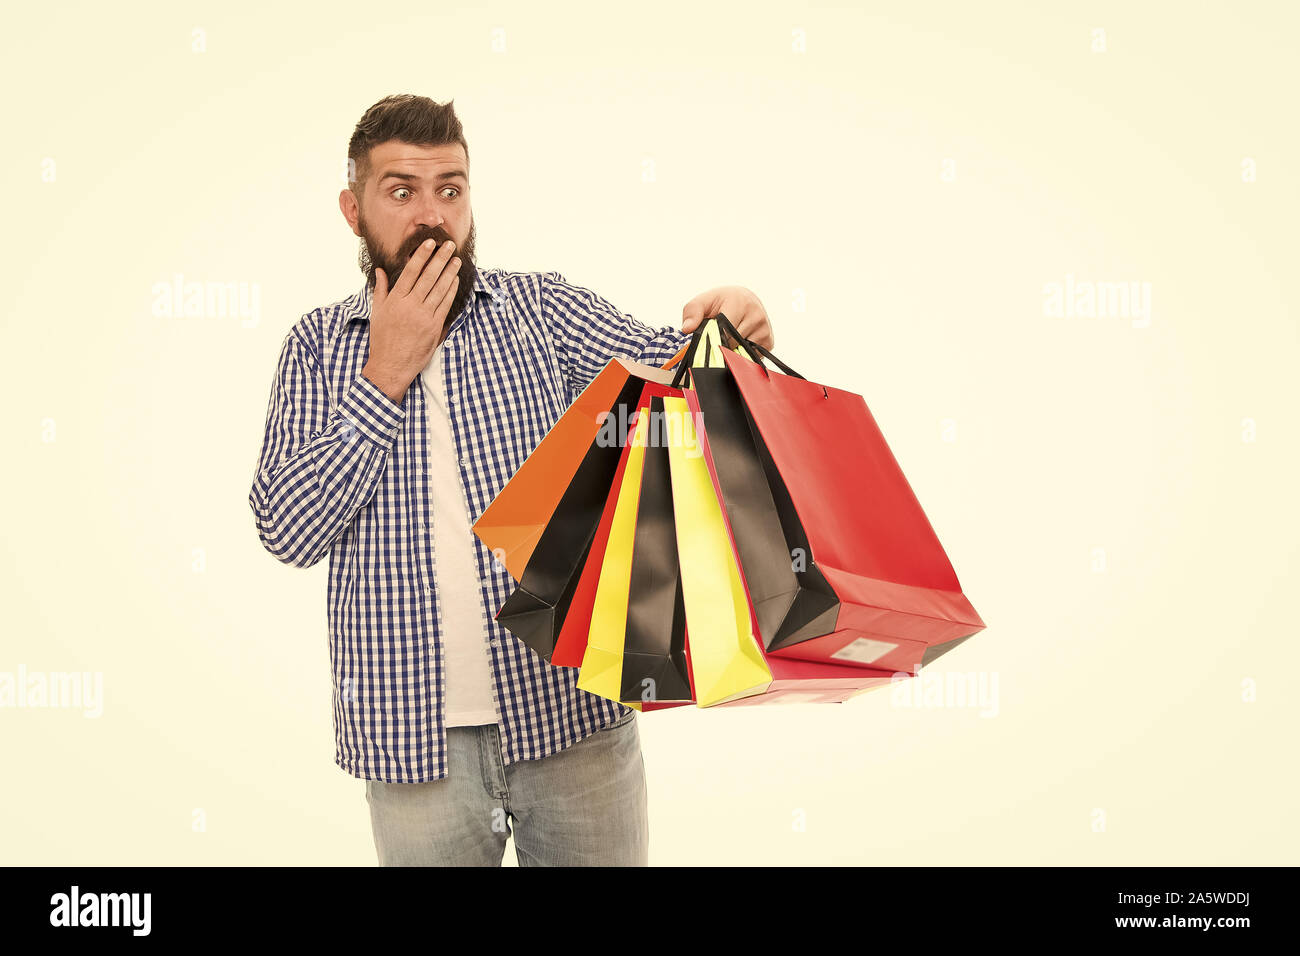 I survived Black Friday. Surprised hipster holding shopping bags after Black Friday isolated on white. Bearded man opening his shopping season on Black Friday. Offering deep discounts on Black Friday. Stock Photo